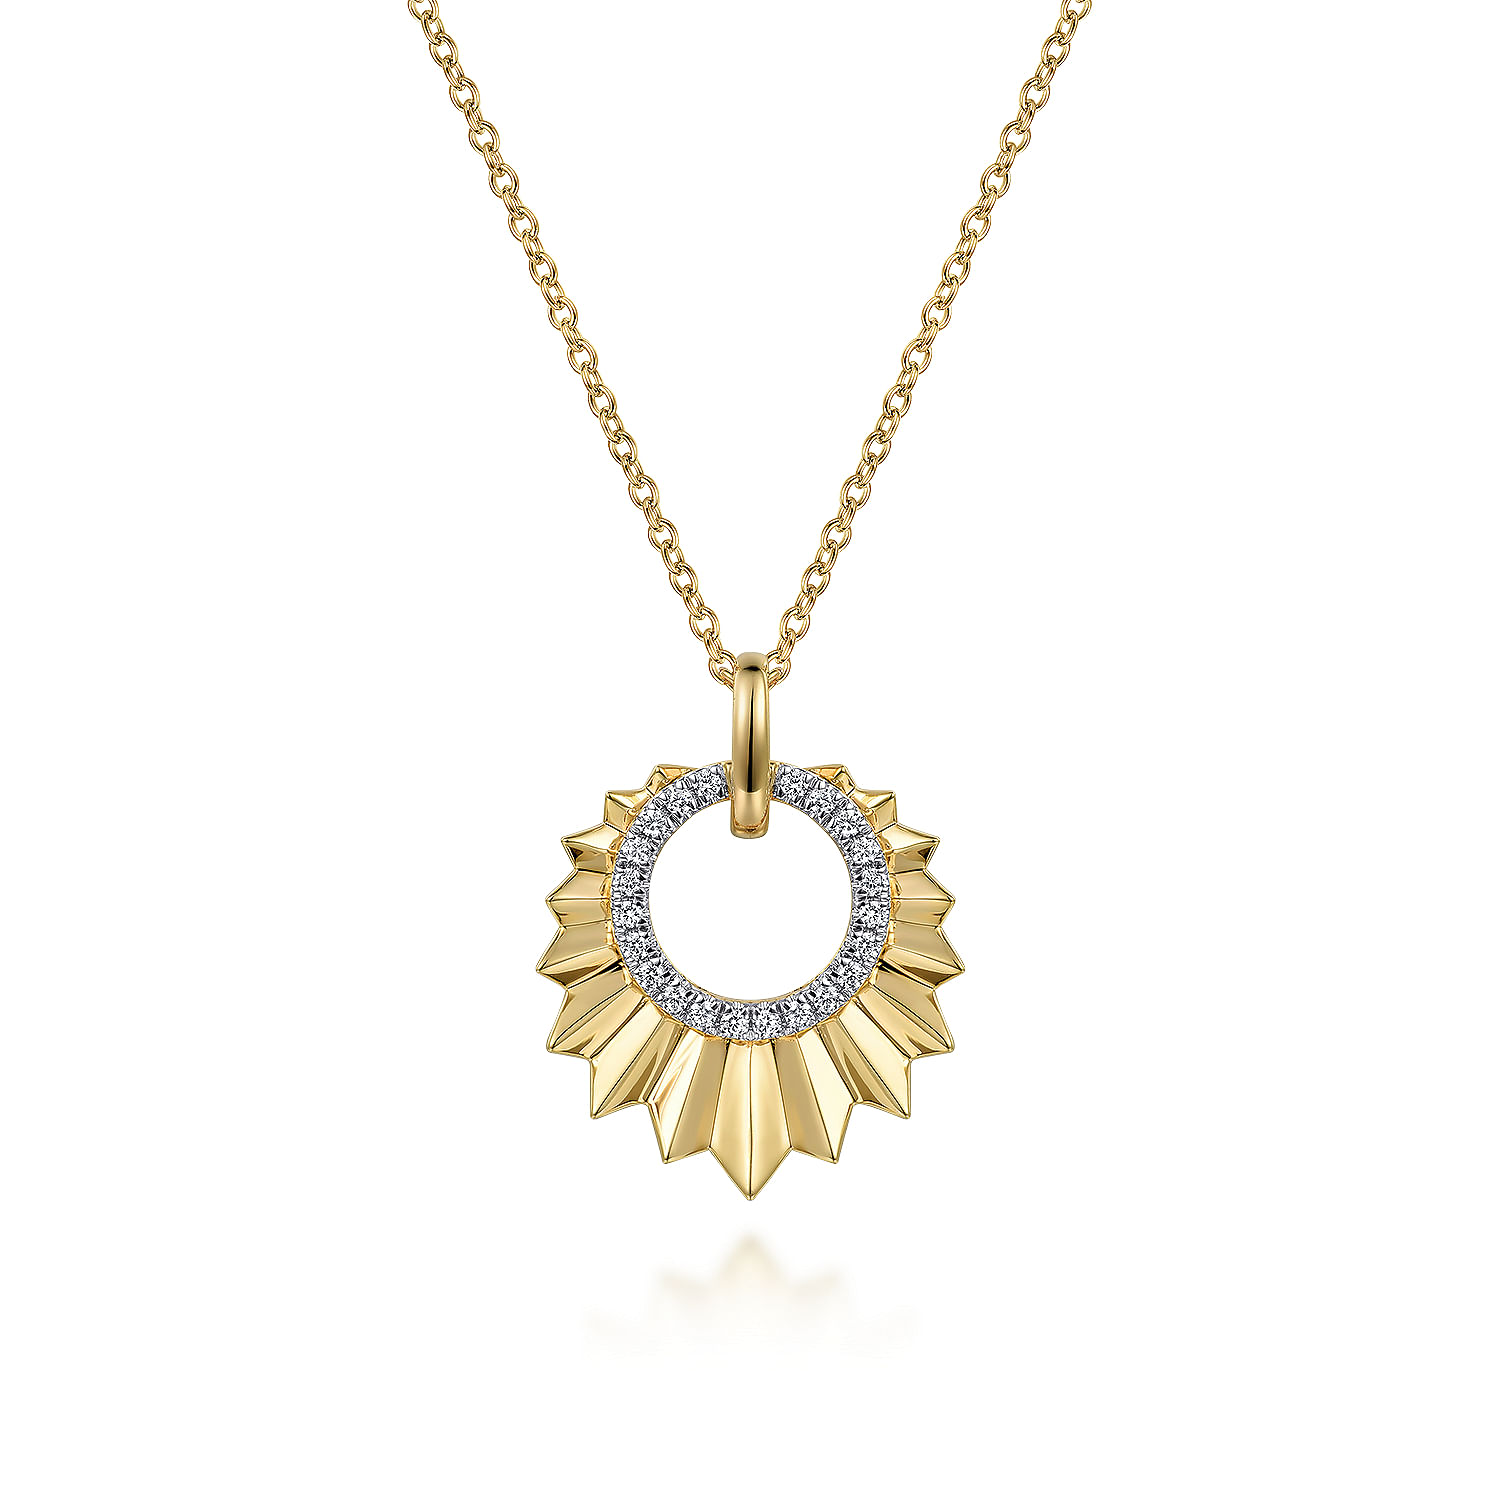 14K Yellow Gold 17 5 inch Diamond Necklace With Diamond Cut Texture In Leaf Shape